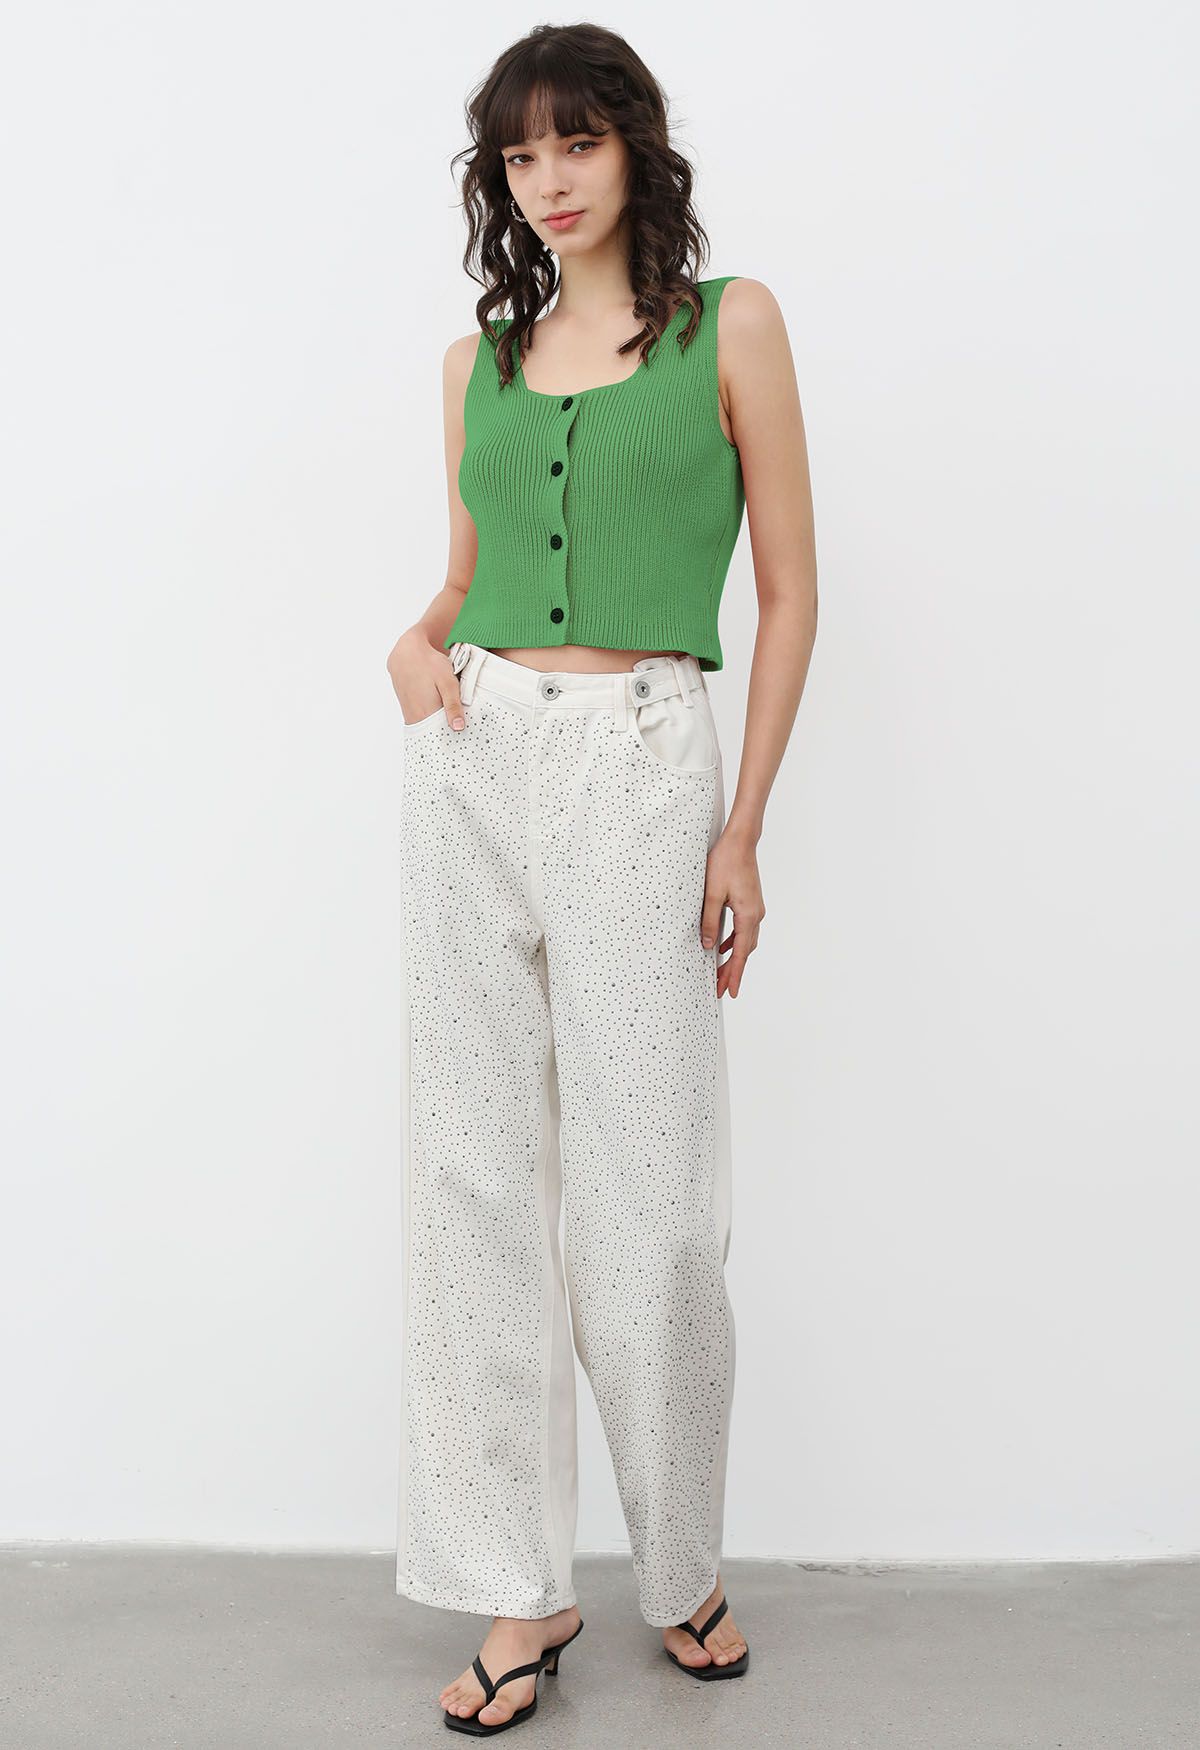 Button Down Sleeveless Knit Crop Top in Green